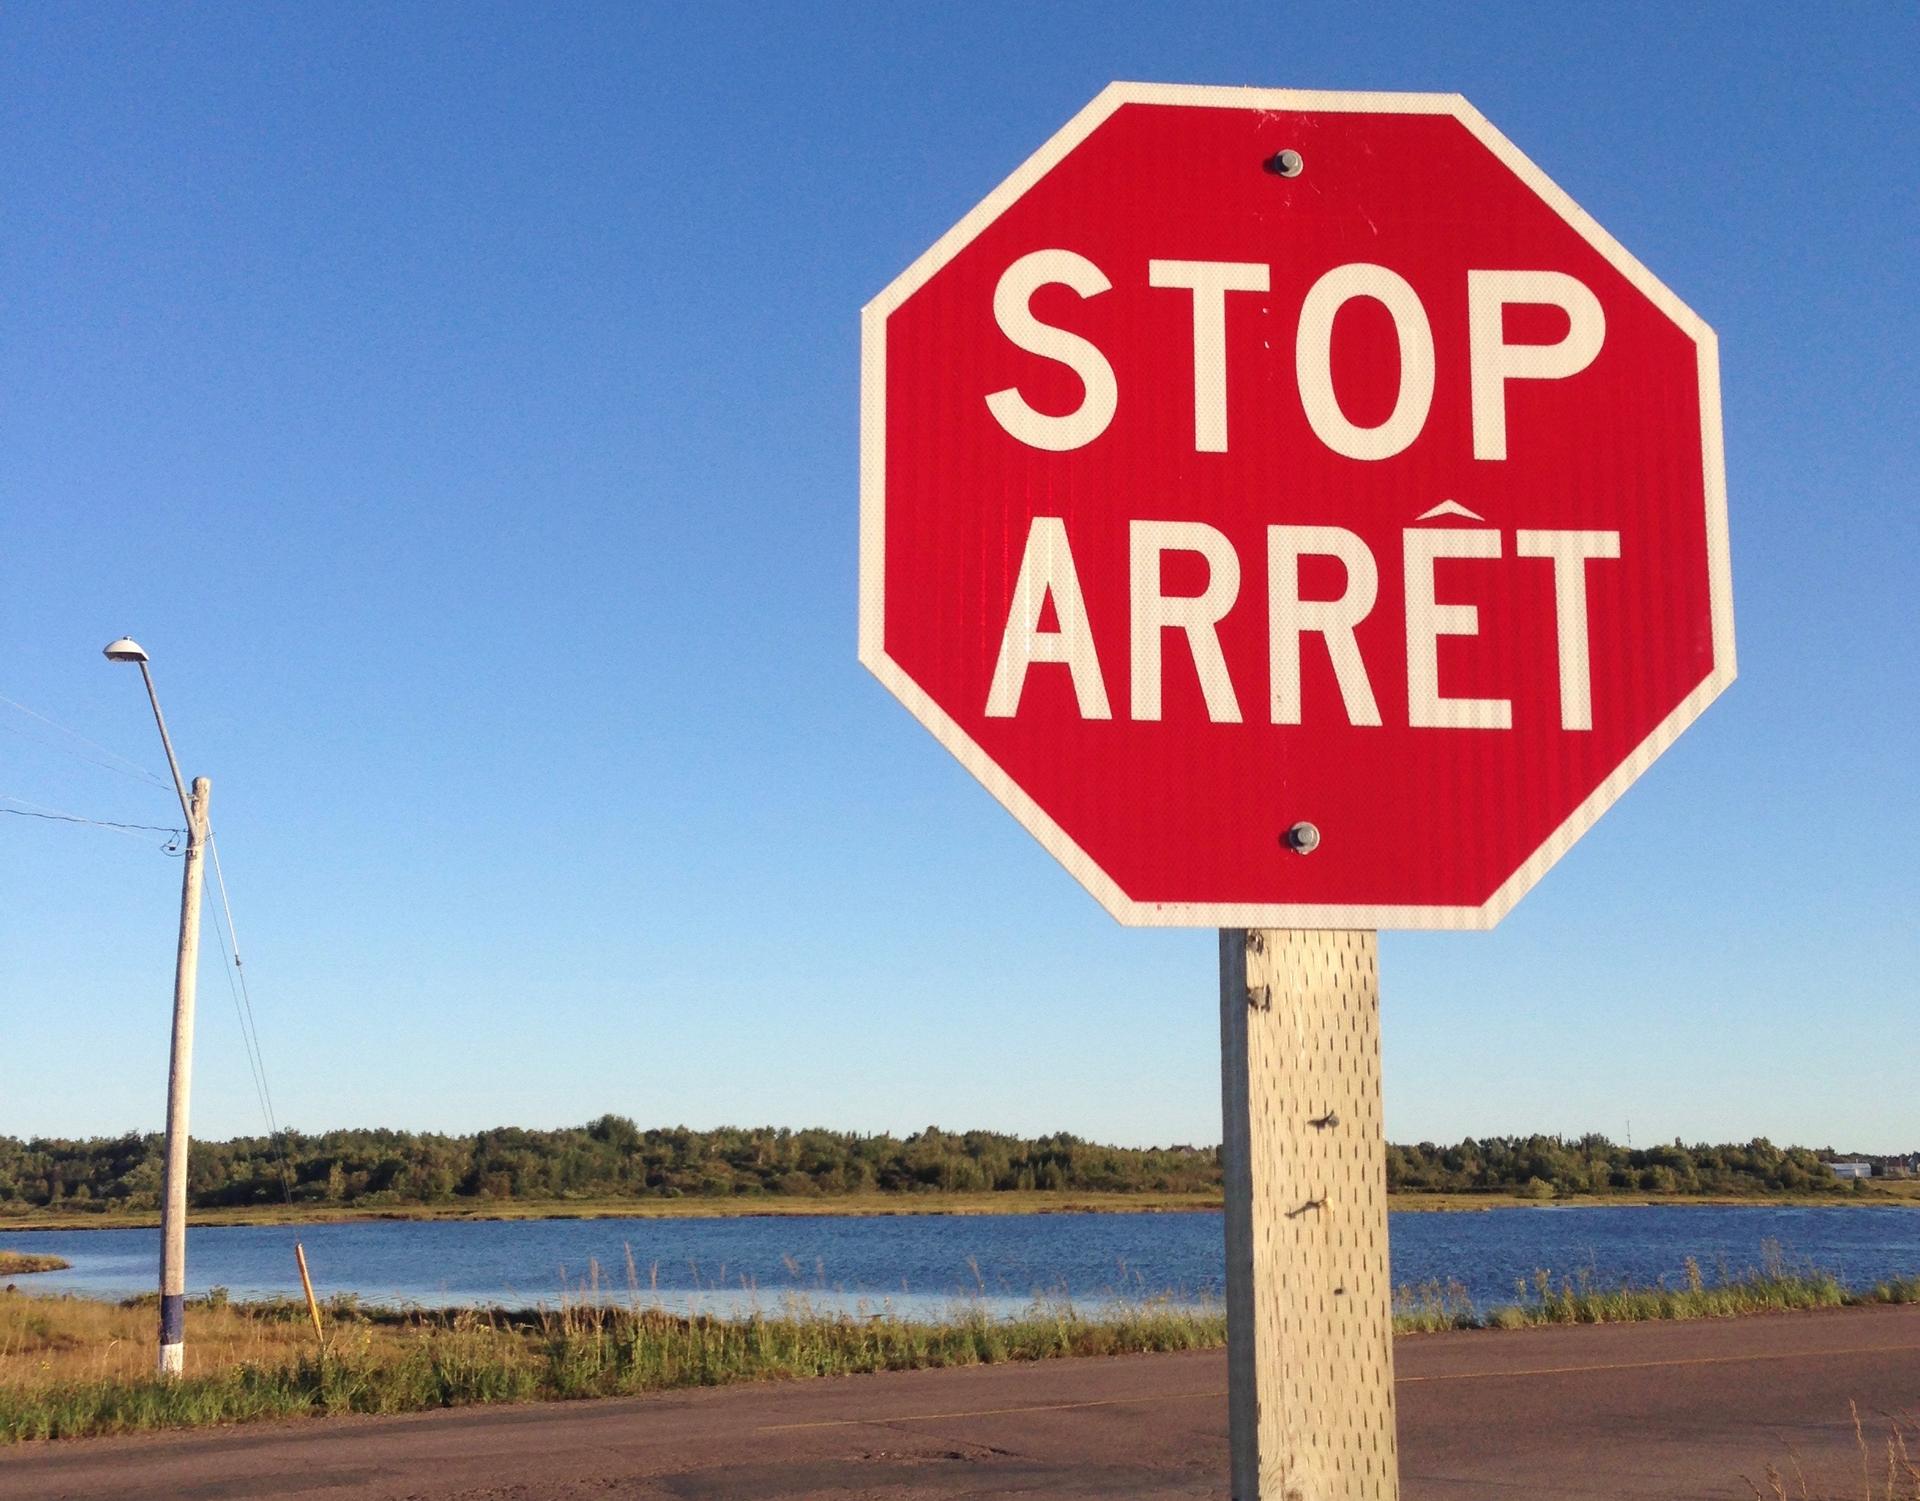 In France, stop signs read 